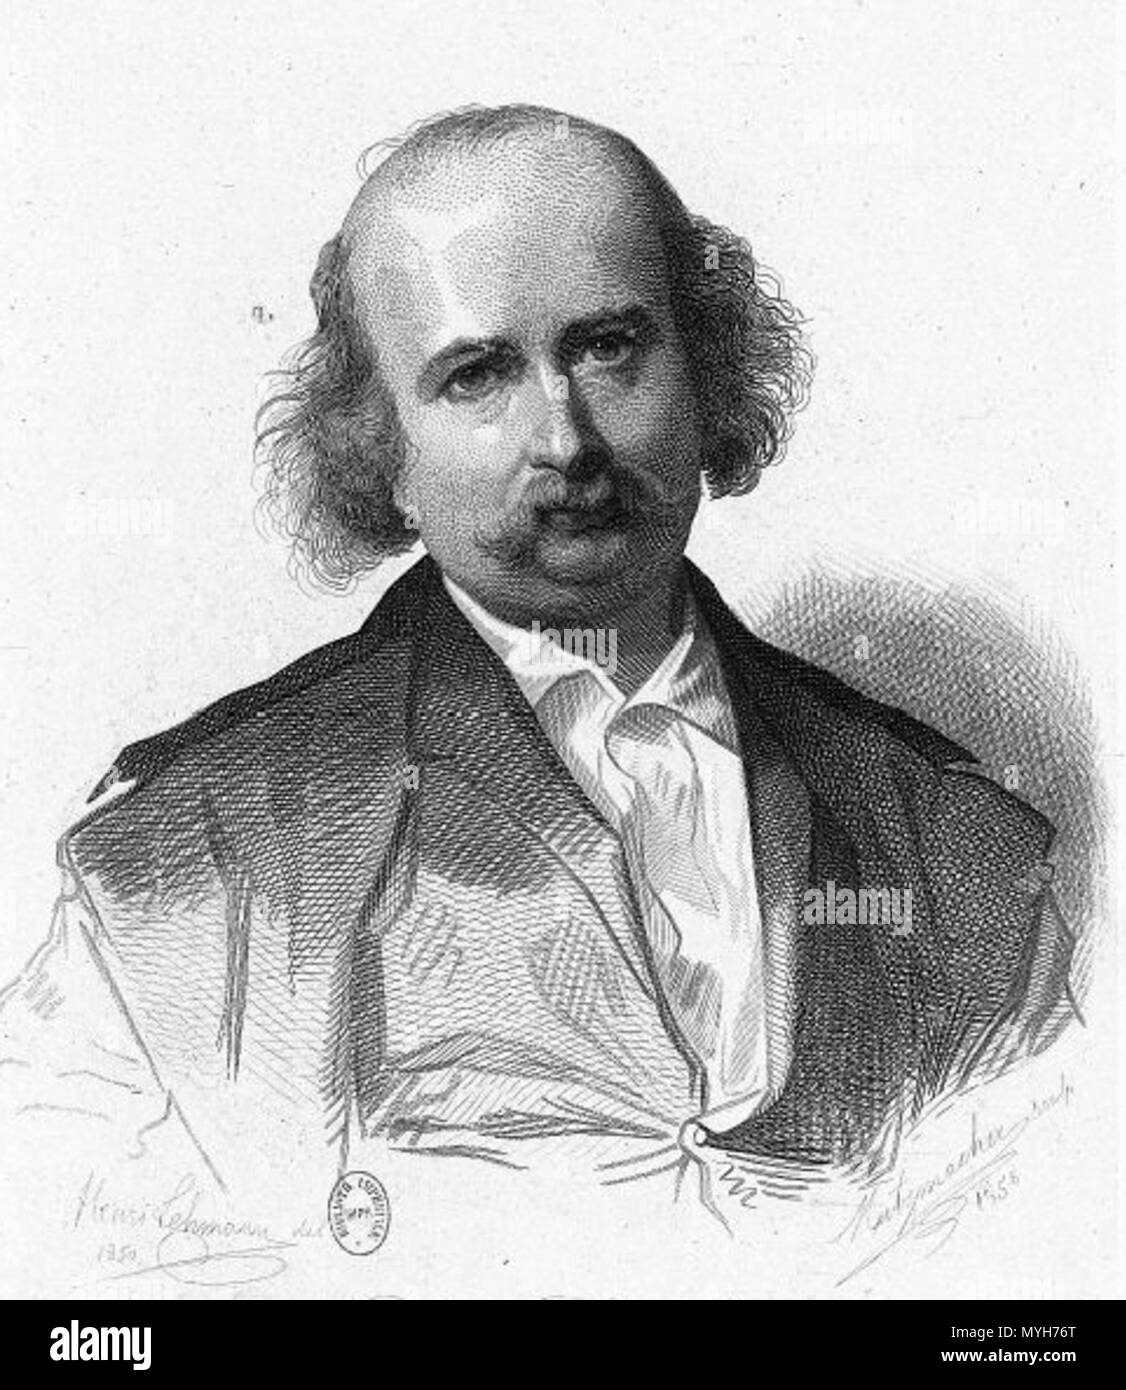 . Portrait of French writer and playwright Jules Sandeau (1811-1883) by Pierre Guillaume Metzmacher or Émile Pierre Metzmacher after Henri Lehmann (1814-1882) . 1858. Metzmacher after Henri Lehmann 286 Jules Sandeau by Henri Lehmann Stock Photo